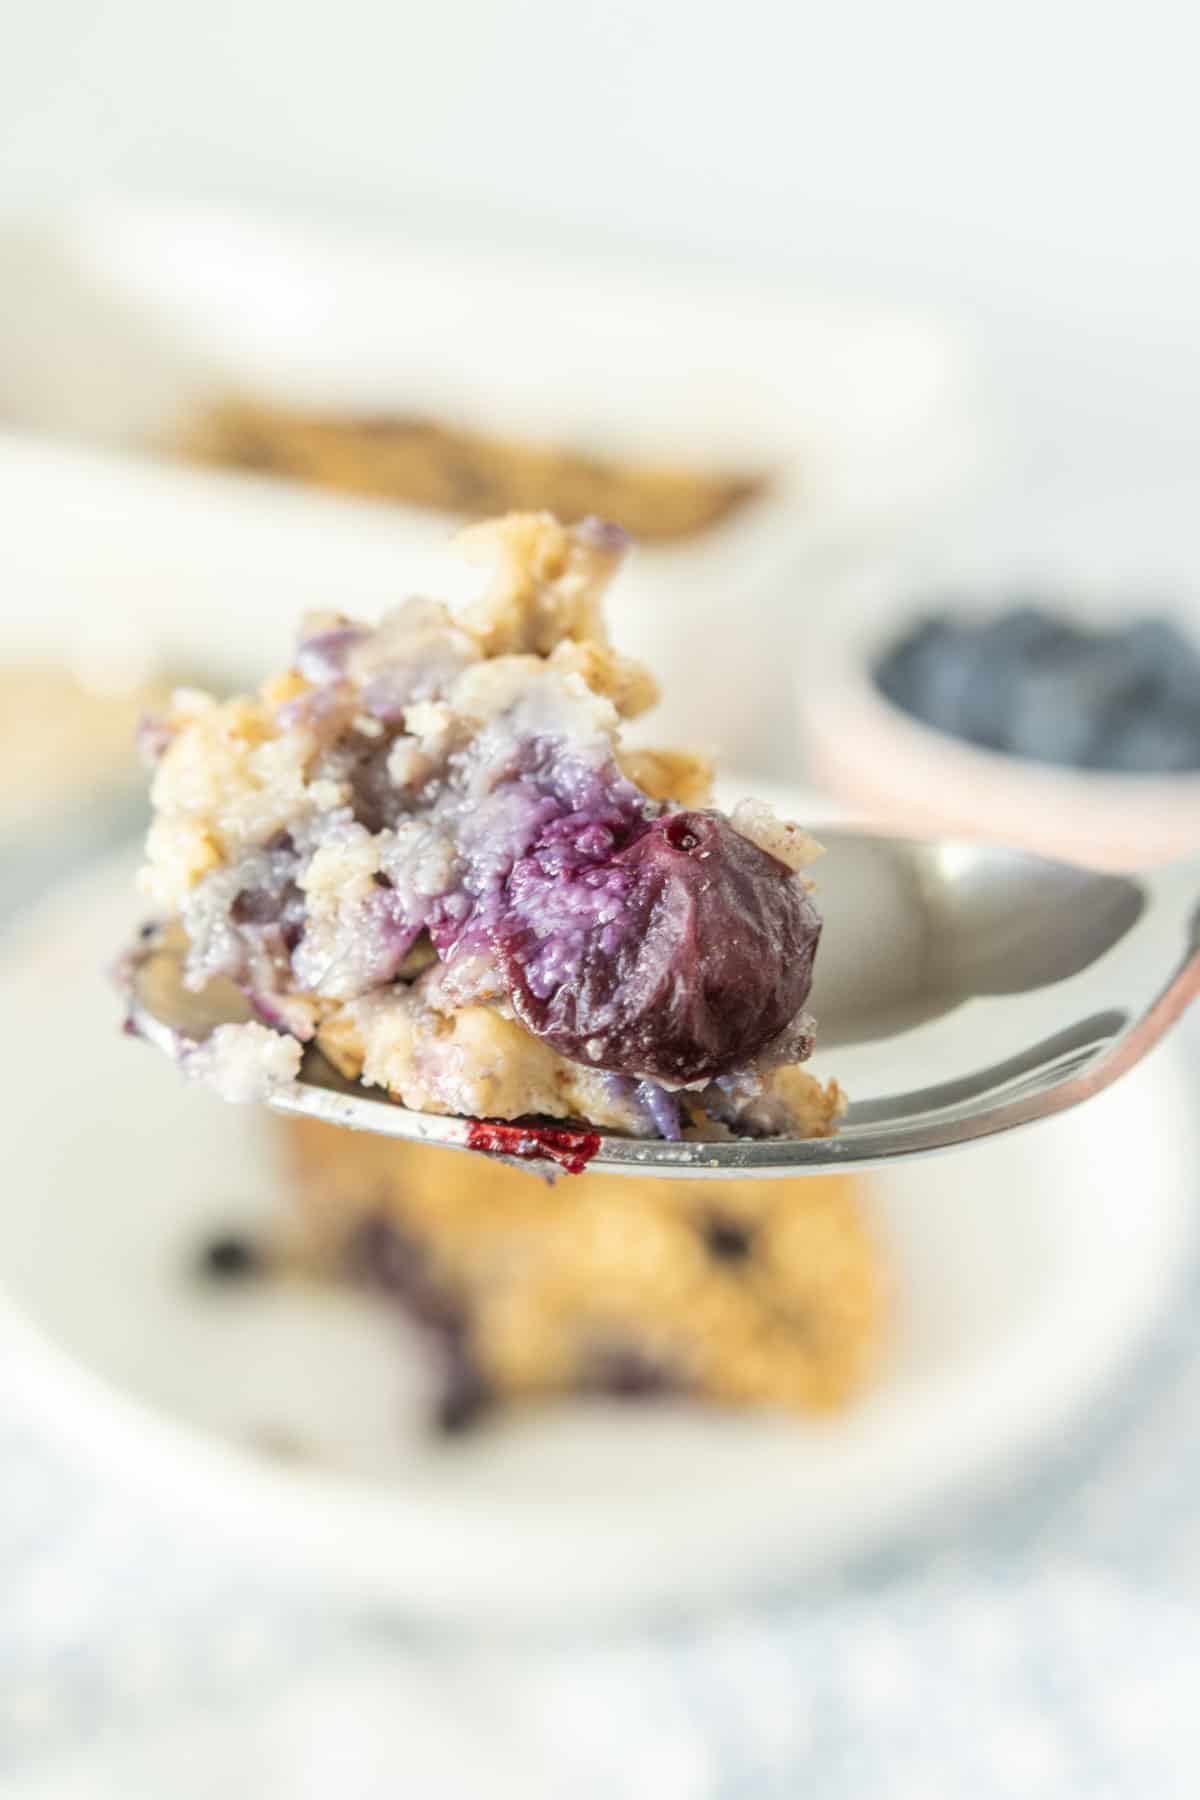 A spoonful of baked oatmeal with blueberries on it.